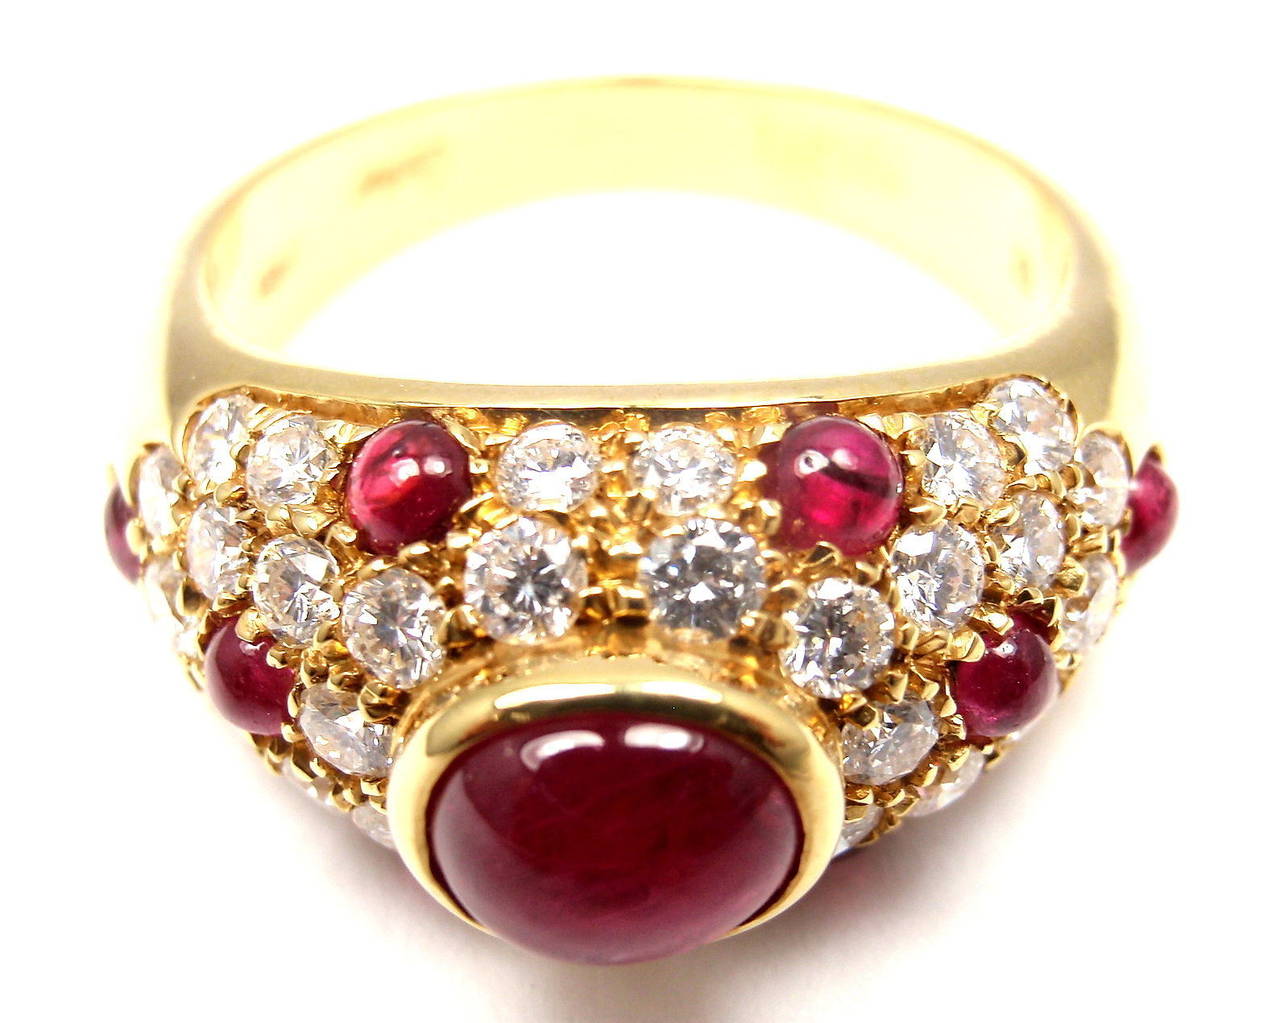 18k Yellow Gold Diamond and Cabochon Ruby Ring by Cartier. 
Part of Cartier's stunning 